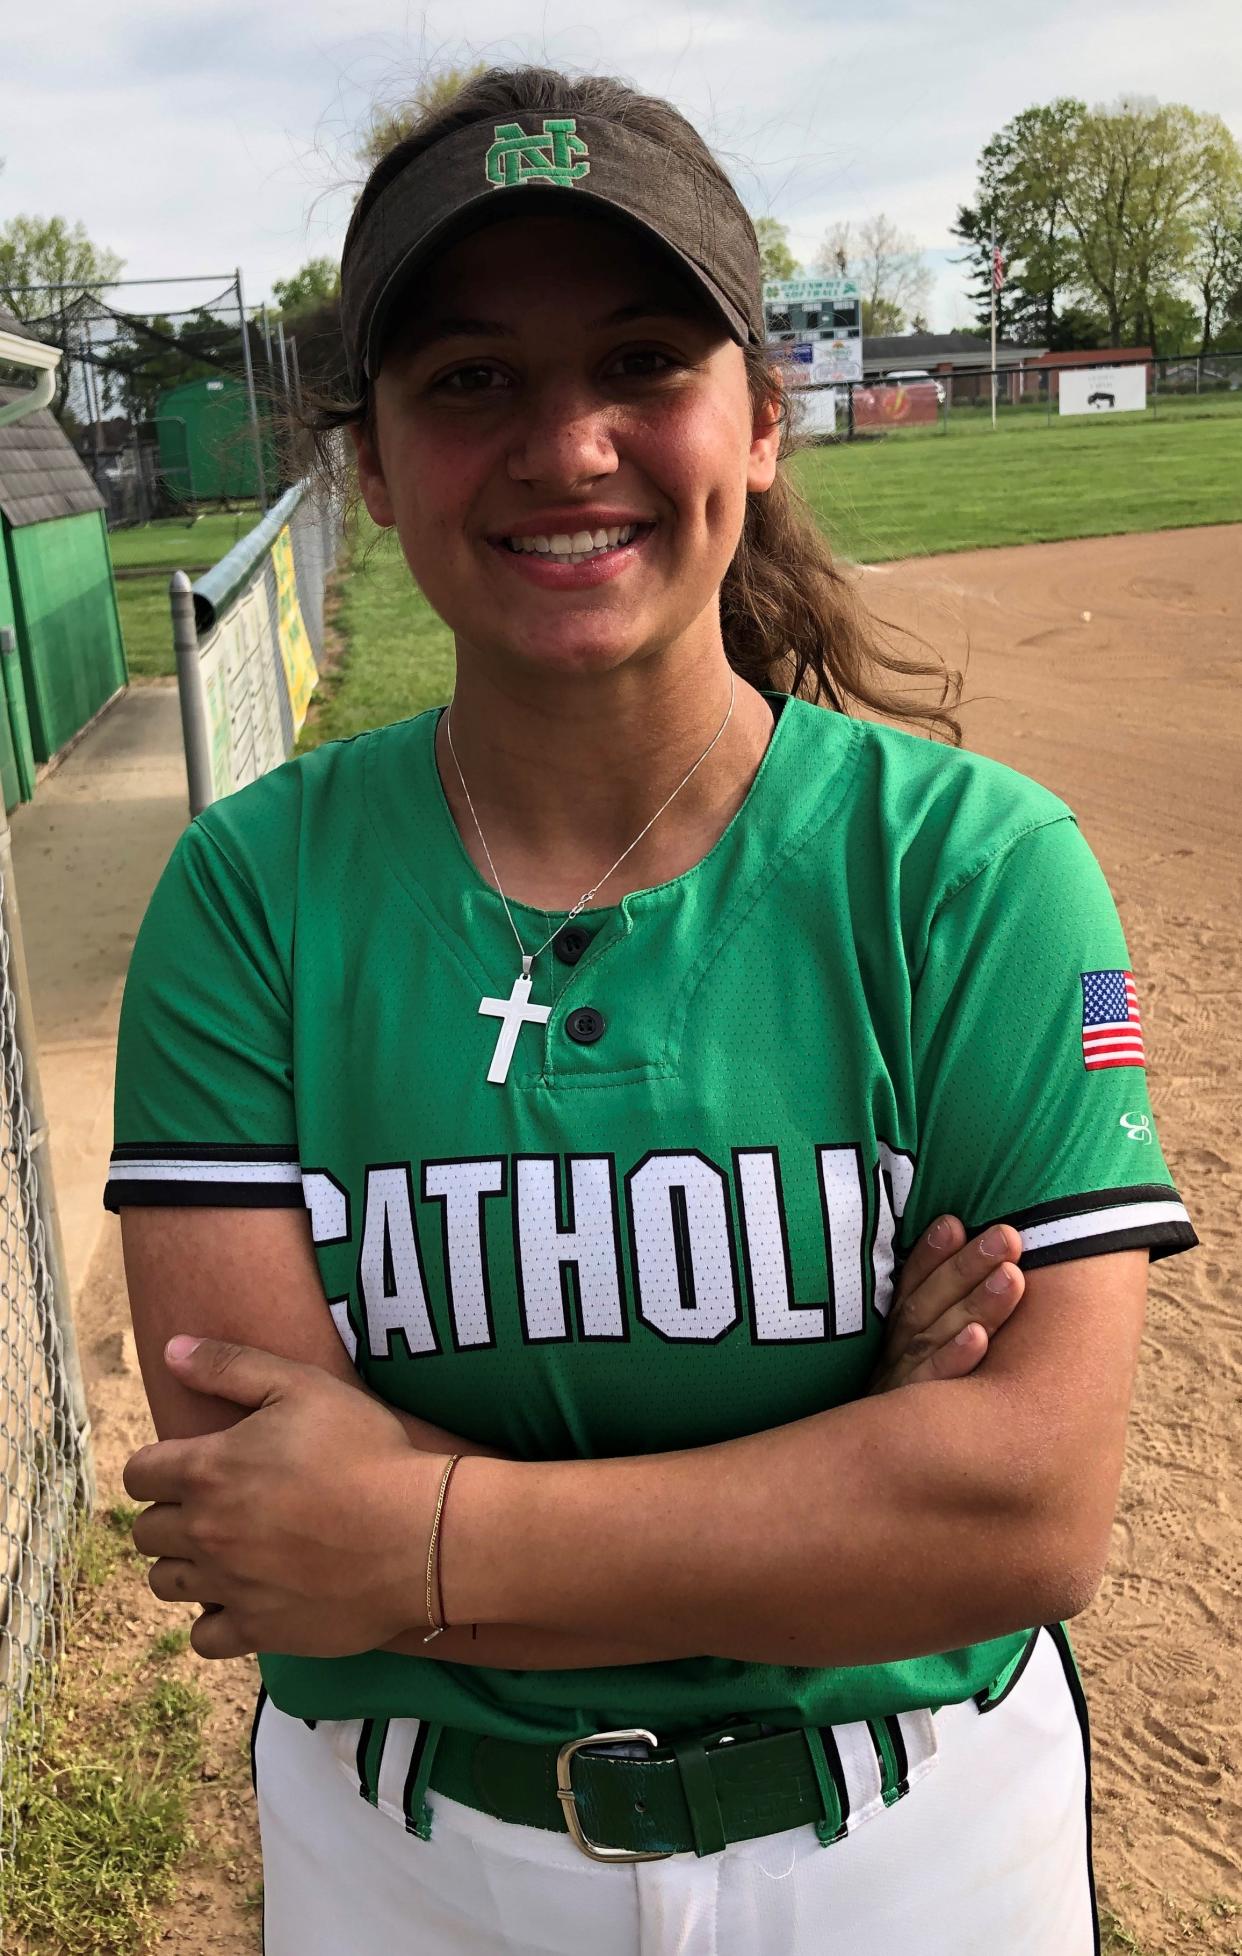 Newark Catholic senior first baseman Maris Knowlton slugged her first homer of the spring and also singled in a run Friday during the 11-1 win against visiting Heath.